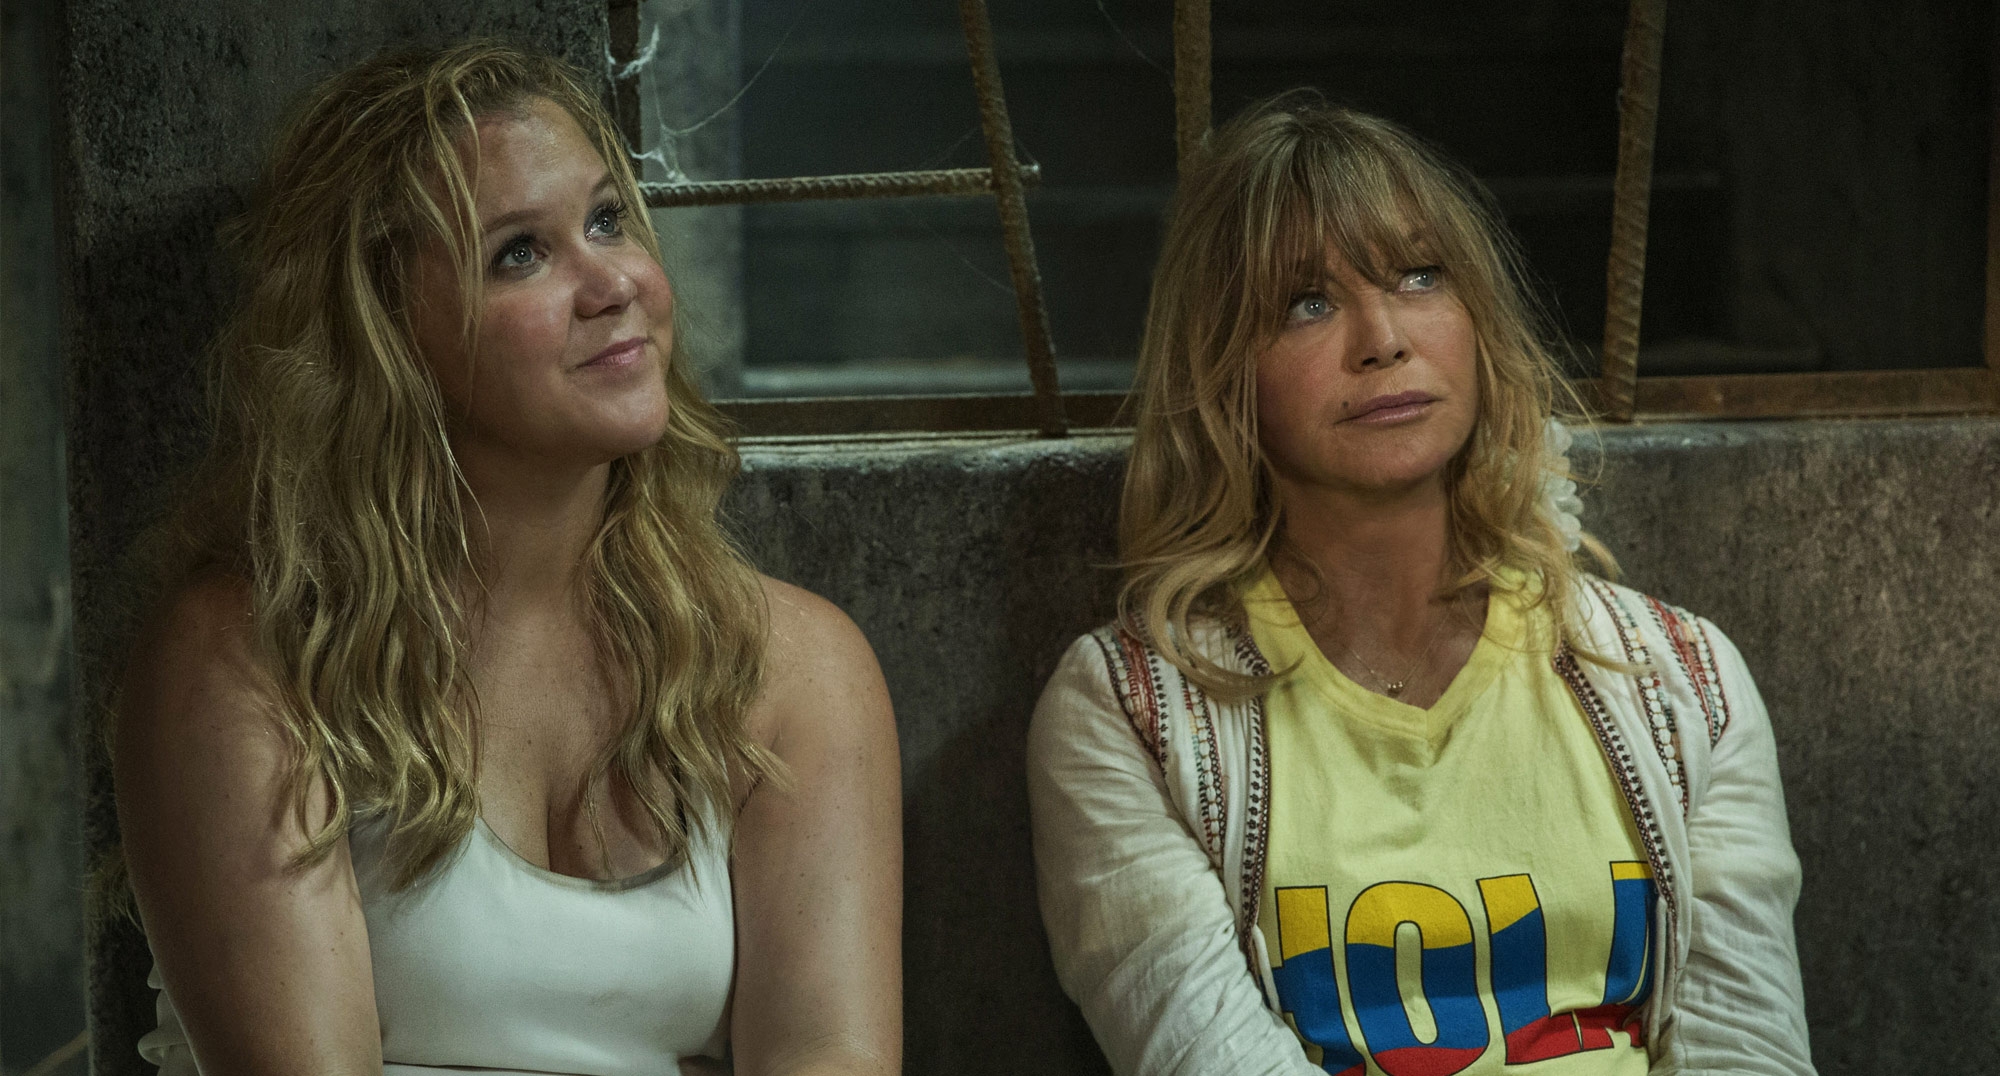 'snatched' movie review, goldie hawn, amy schumer, lucas mirabella